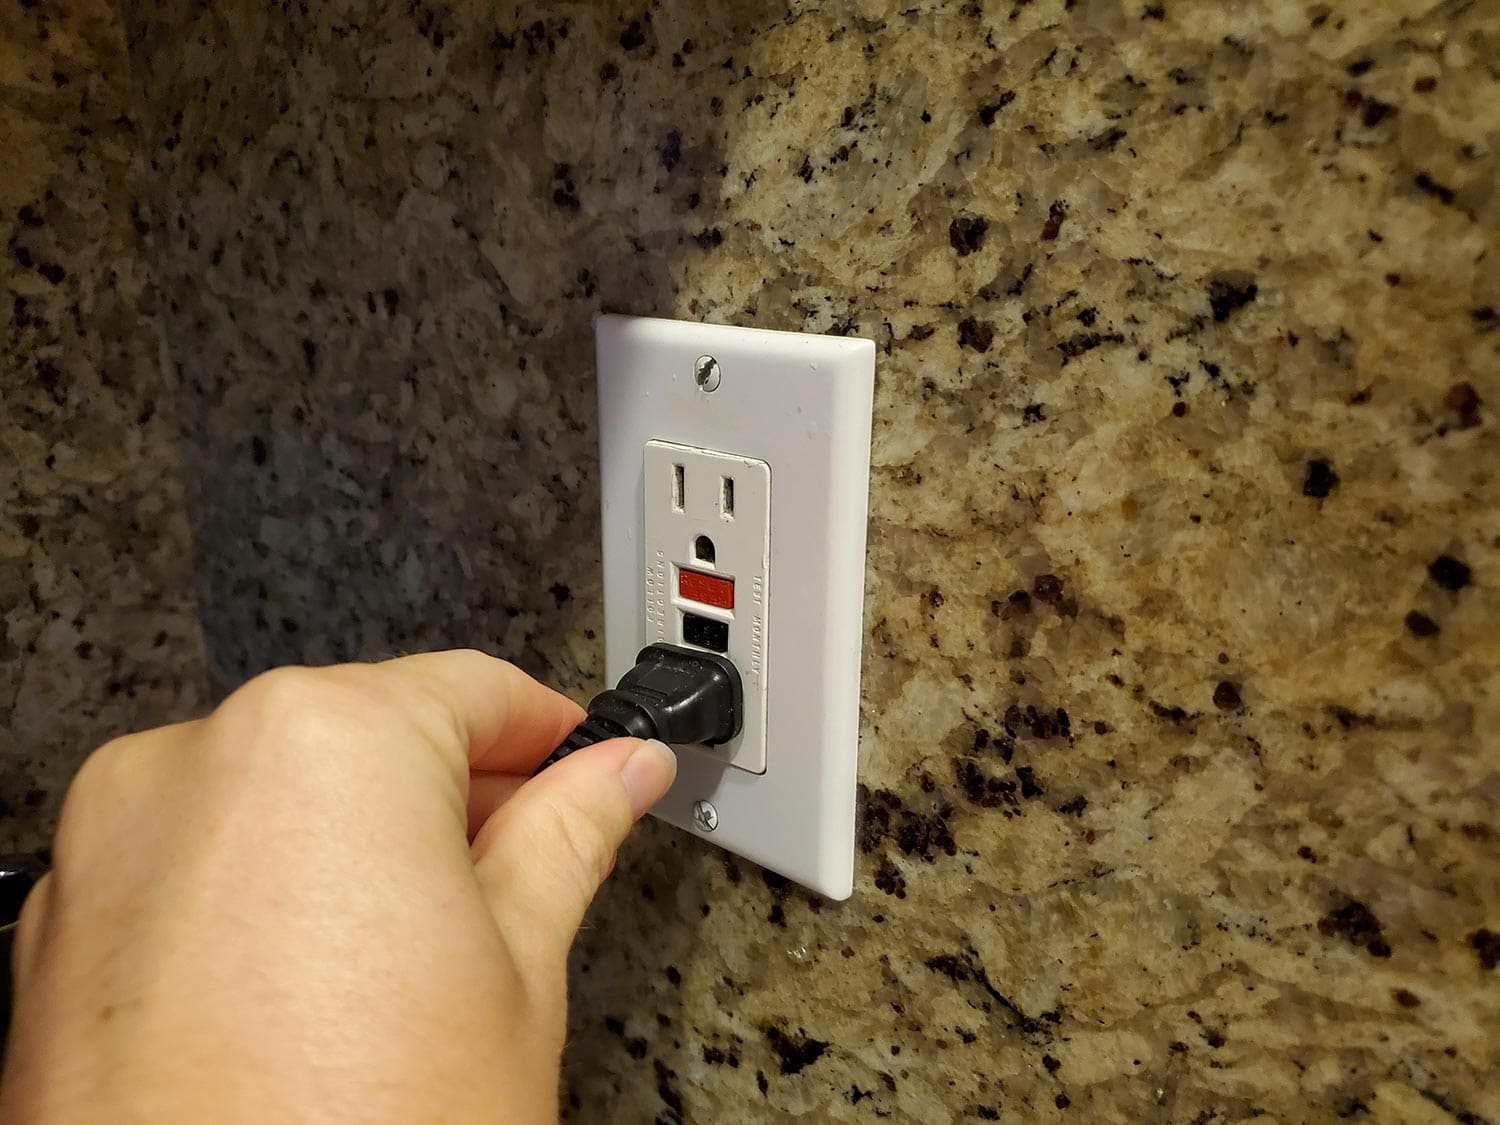 Man plugging an electrical cord into a Ground Fault Circuit Interrupter (GFCI) electrical outlet on the wall